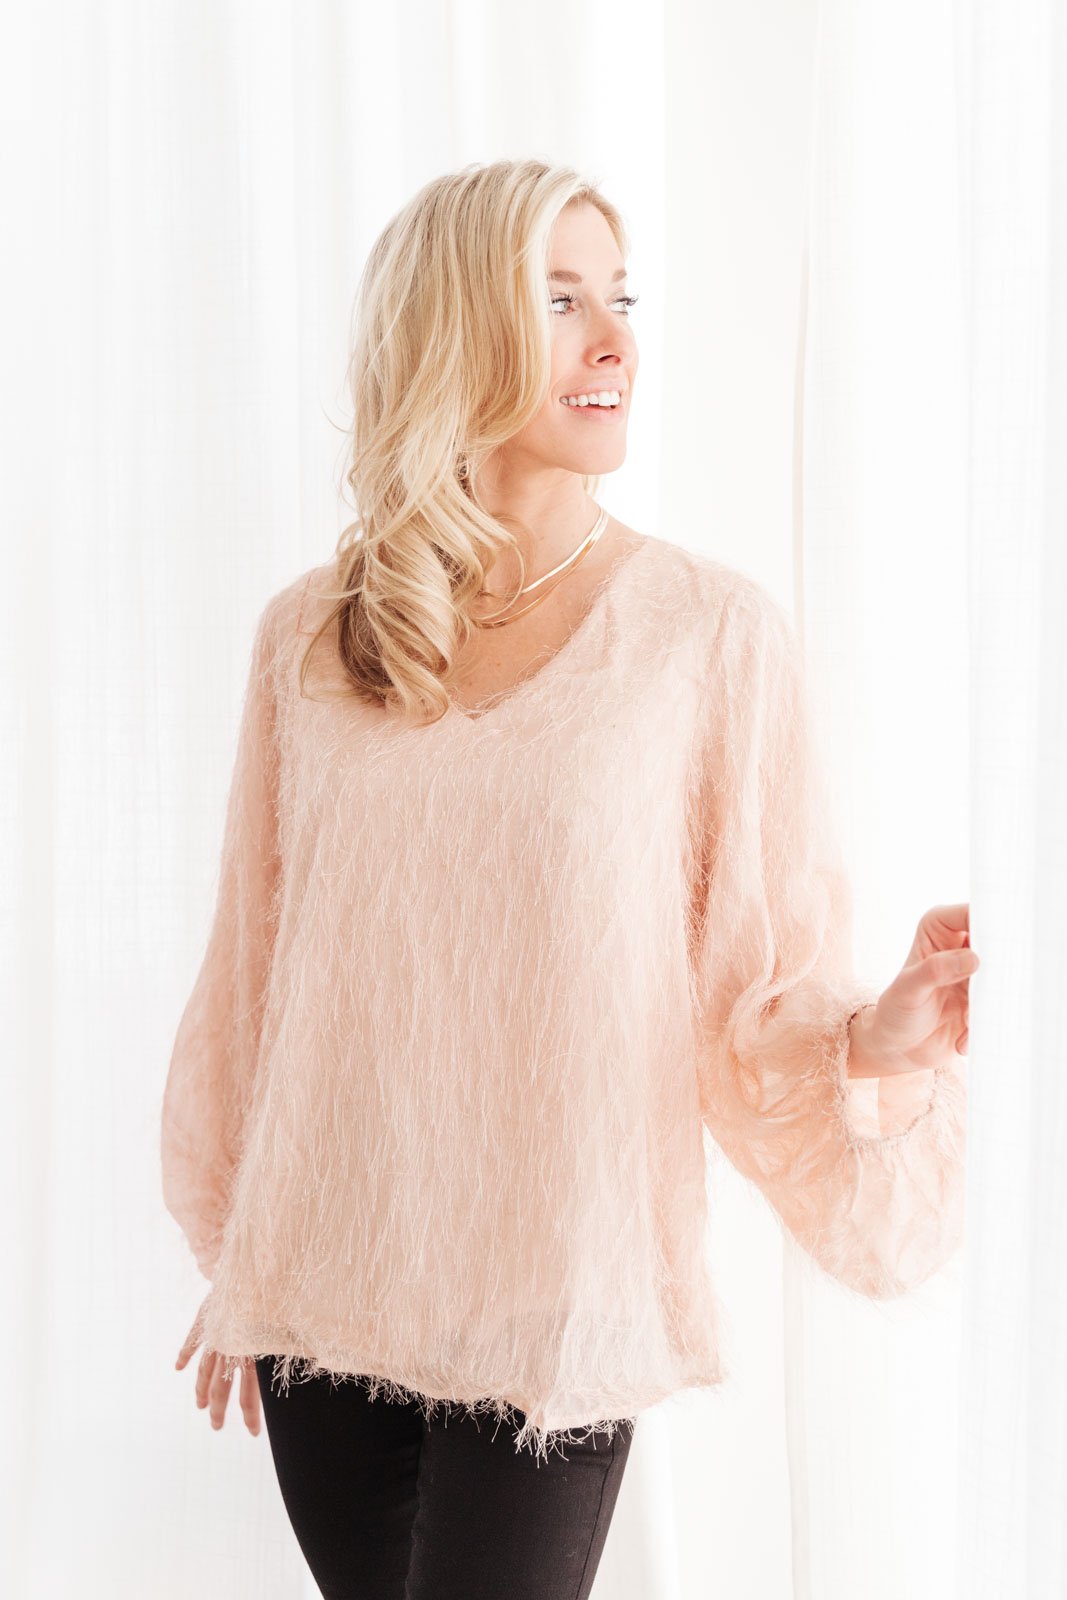 Express Yourself Top in Peach (Online Exclusive)